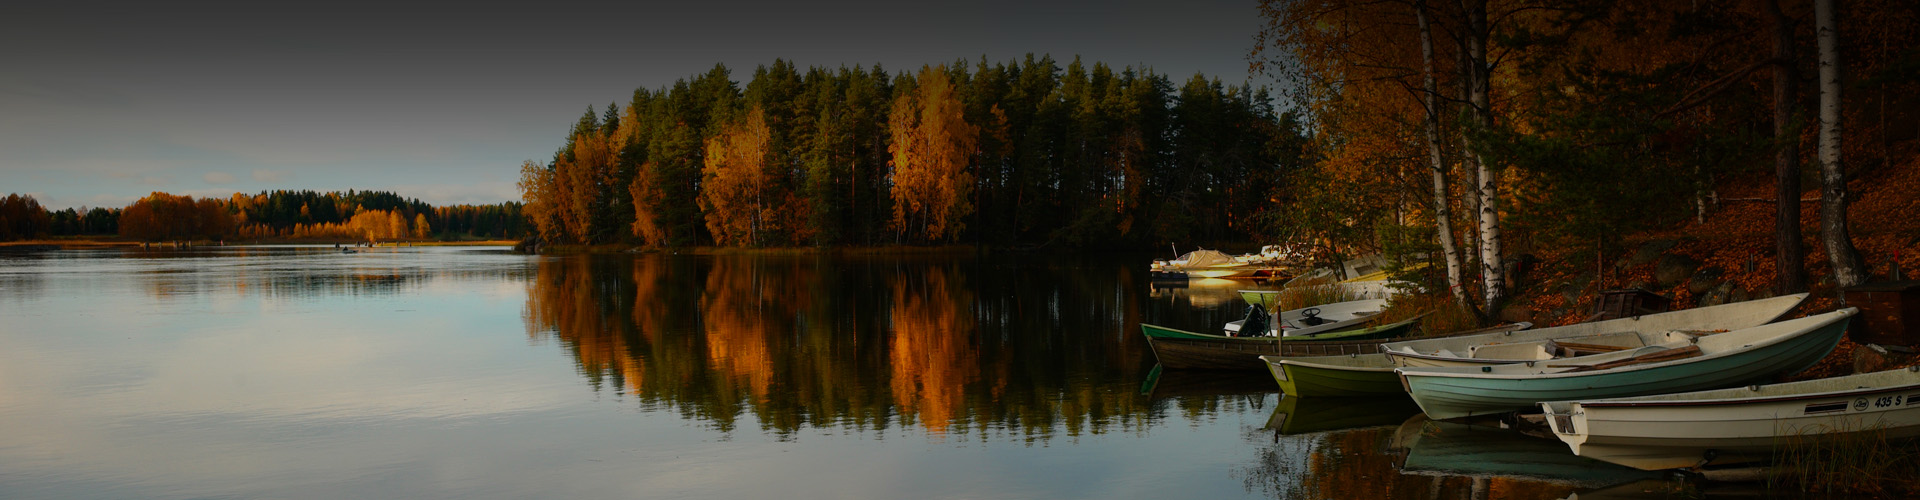 Photo of a forested lake during autumn